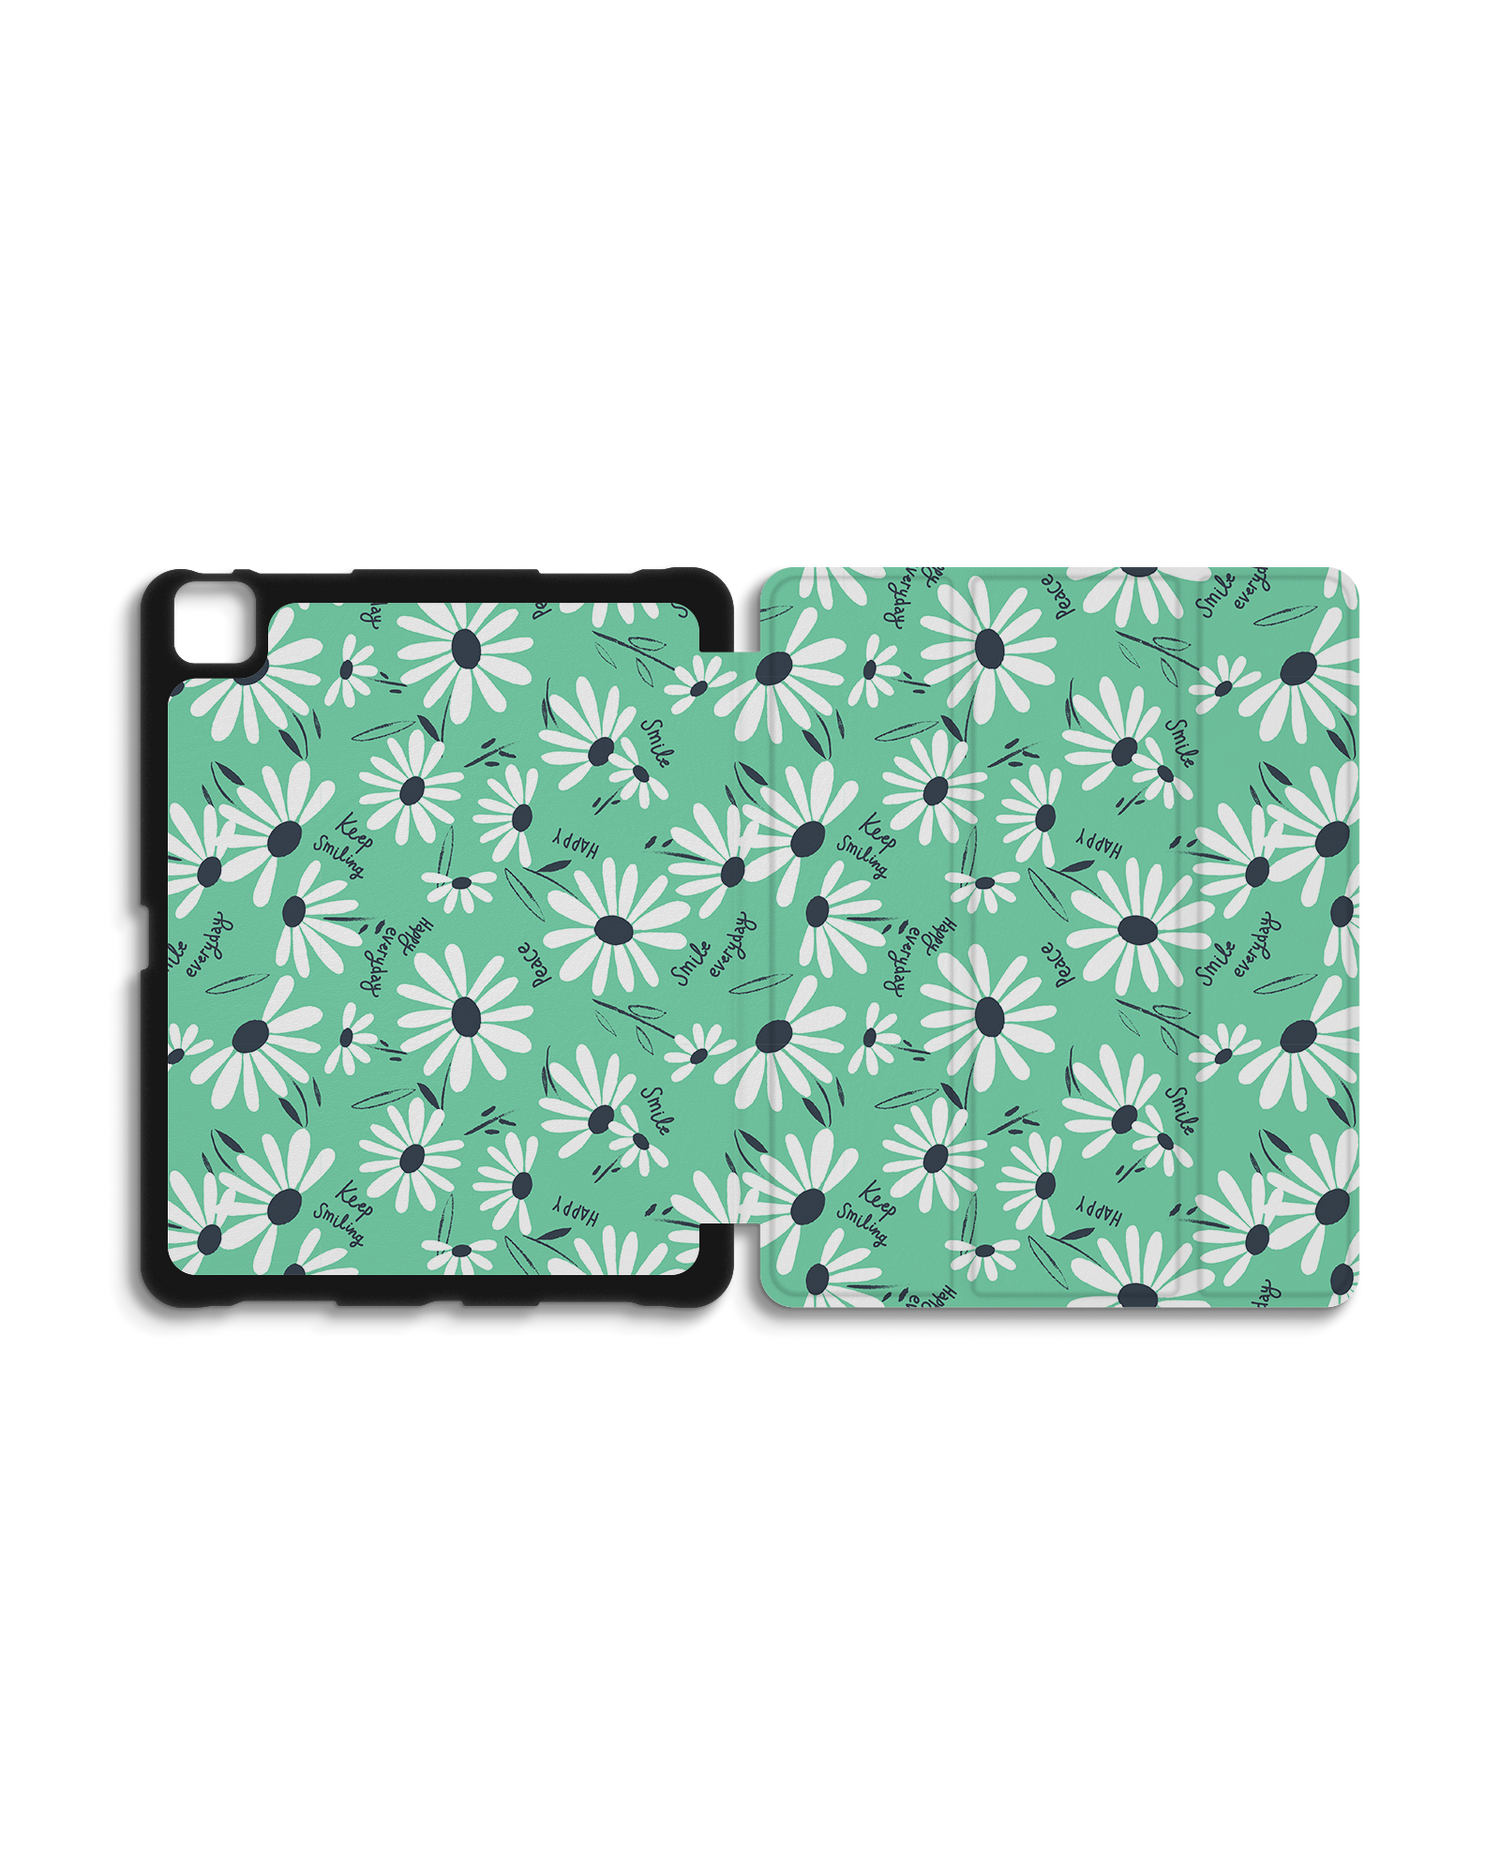 Positive Daisies iPad Case with Pencil Holder for Apple iPad Pro 6 12.9